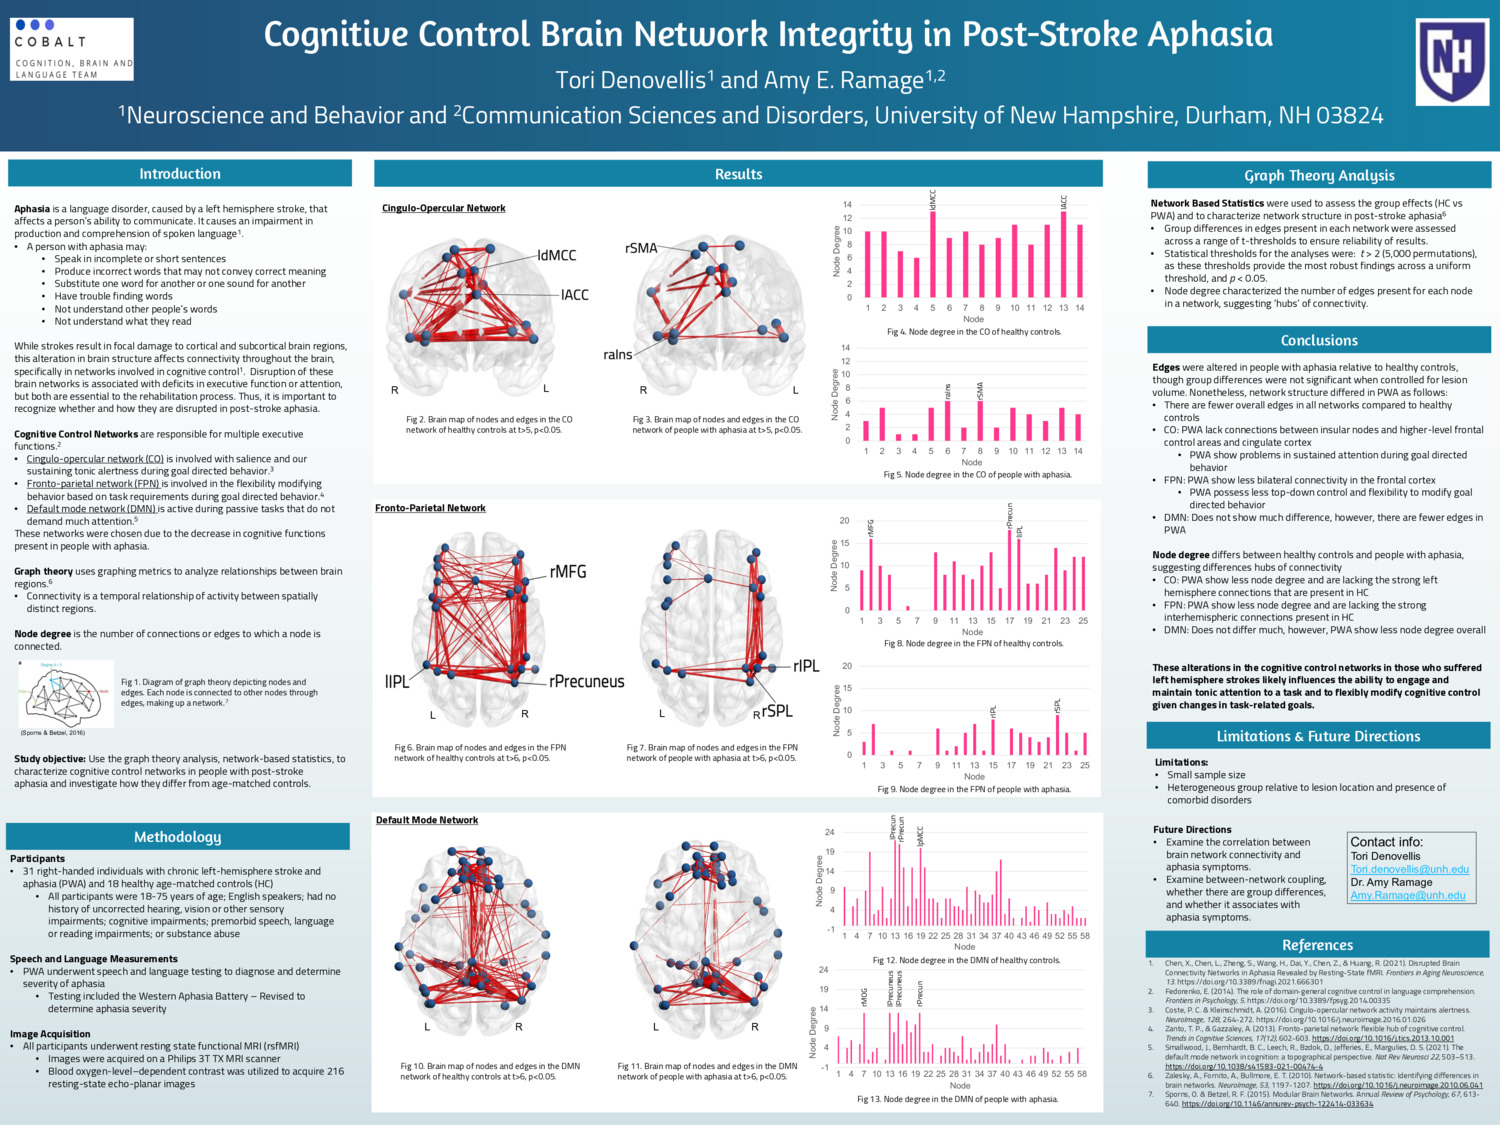 Cognitive Control Brain Network Integrity In Post-Stroke Aphasia by ved1009